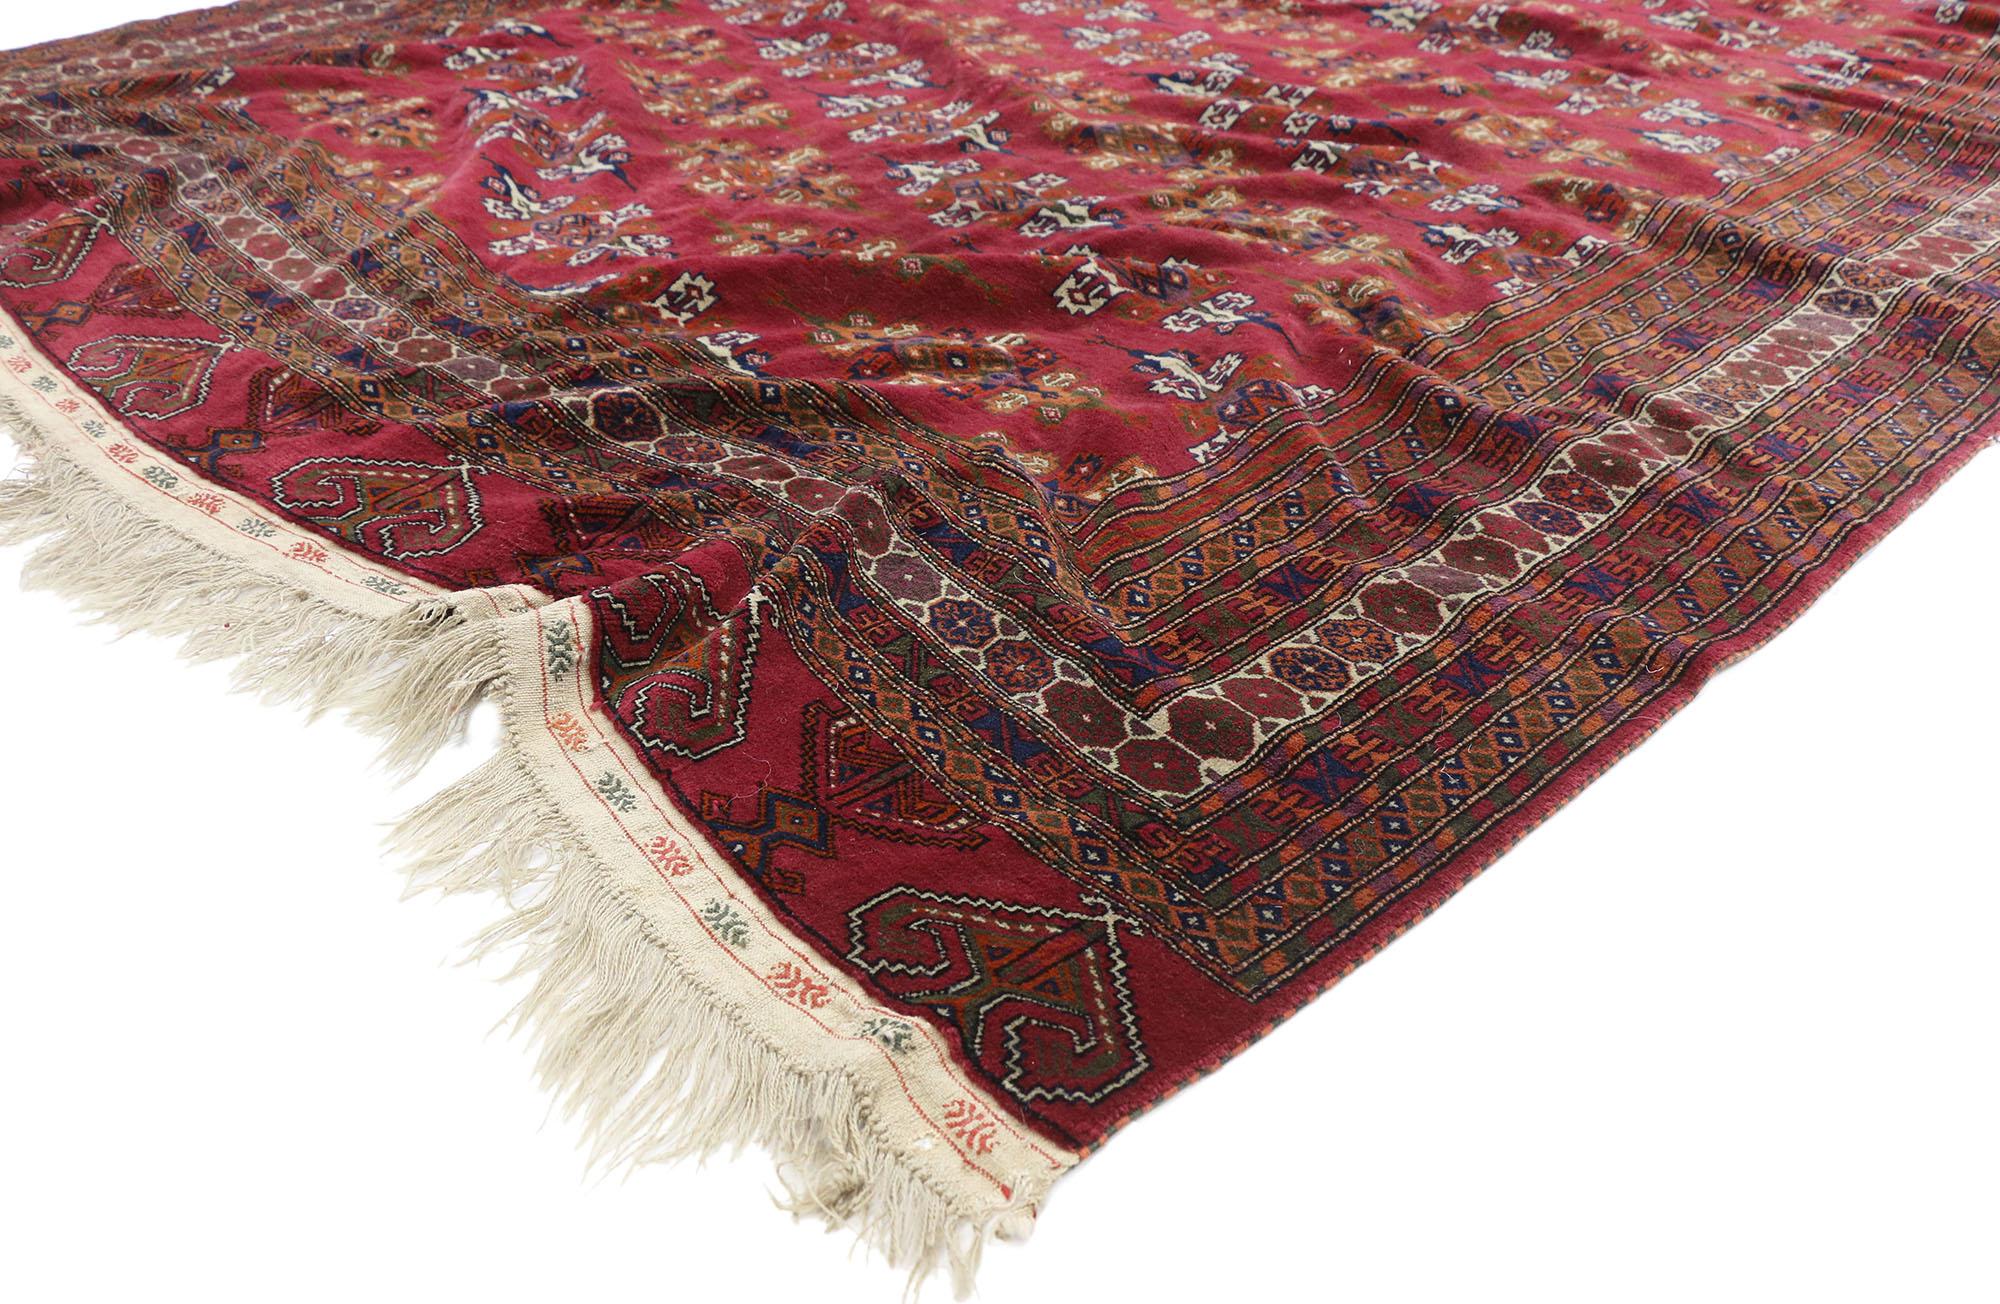 20793 Vintage Persian Baluch Rug, 07'03 x 10'05. Persian Baluch rugs are handwoven textiles originating from the Baluchistan region, crafted by the Baloch people. Characterized by tribal designs, earthy colors, and intricate motifs, these rugs